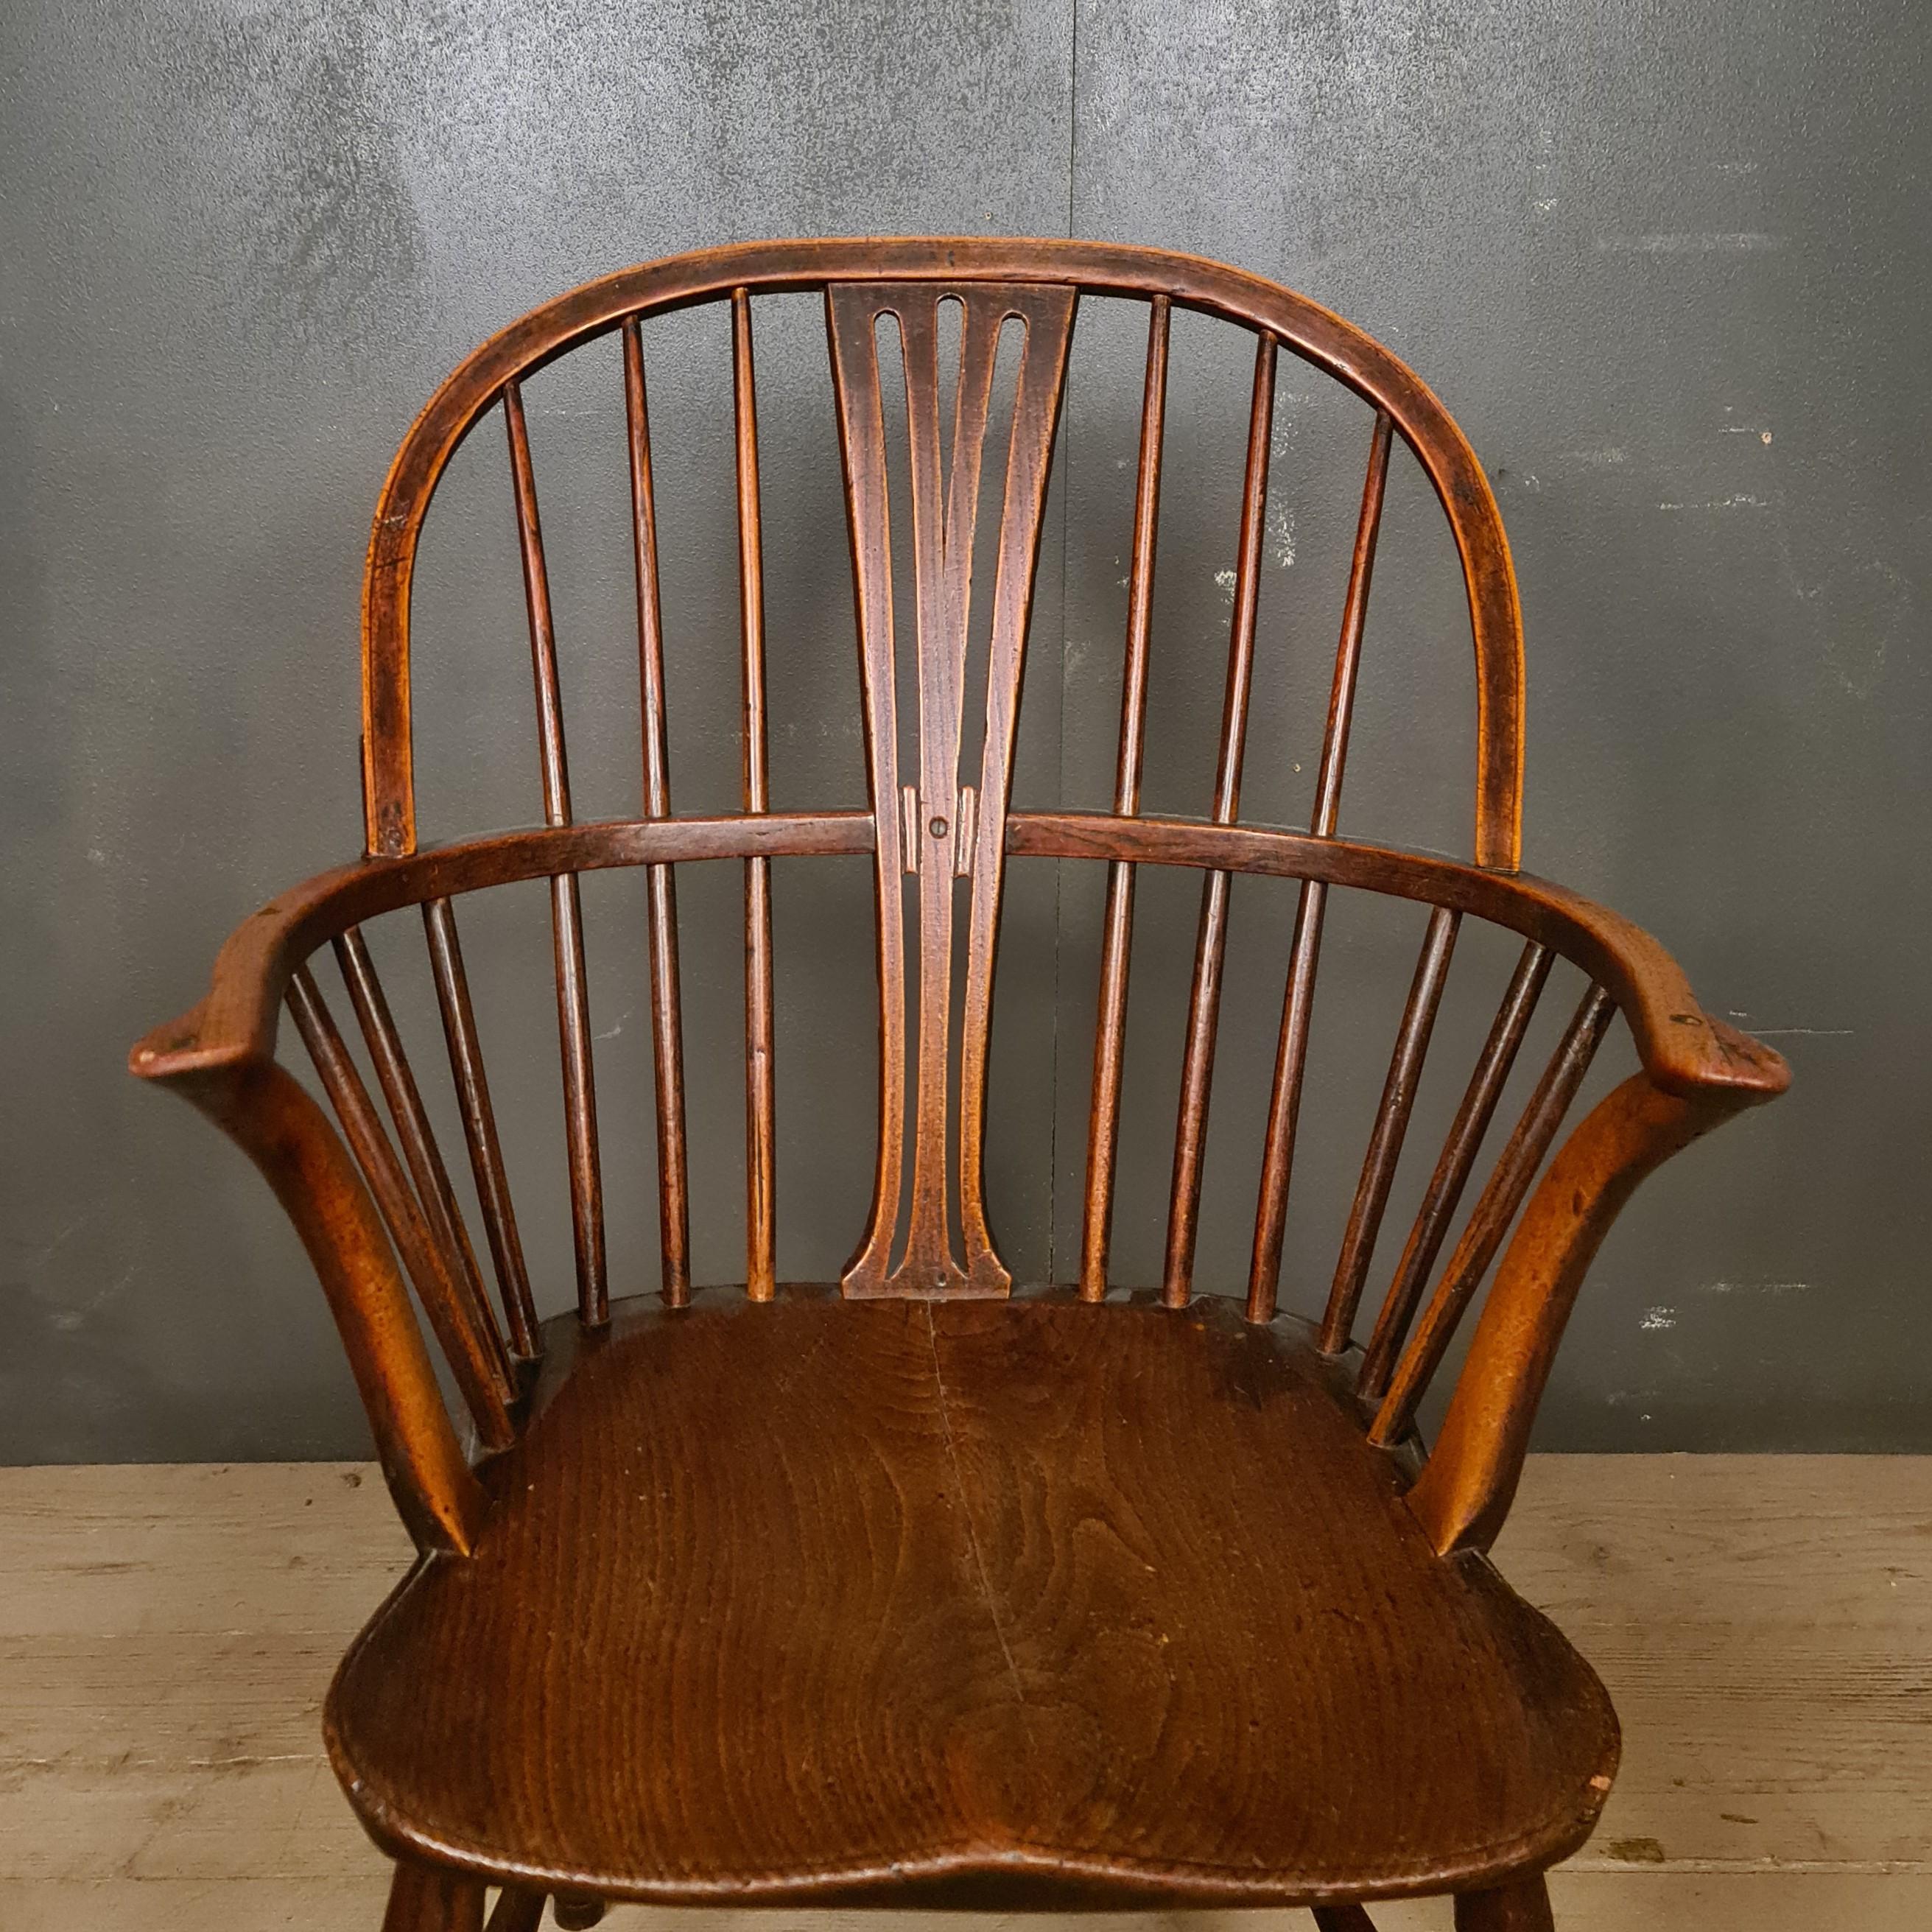 Mid-19th century ash and elm Windsor chair, 1850

Seat height - 14.5